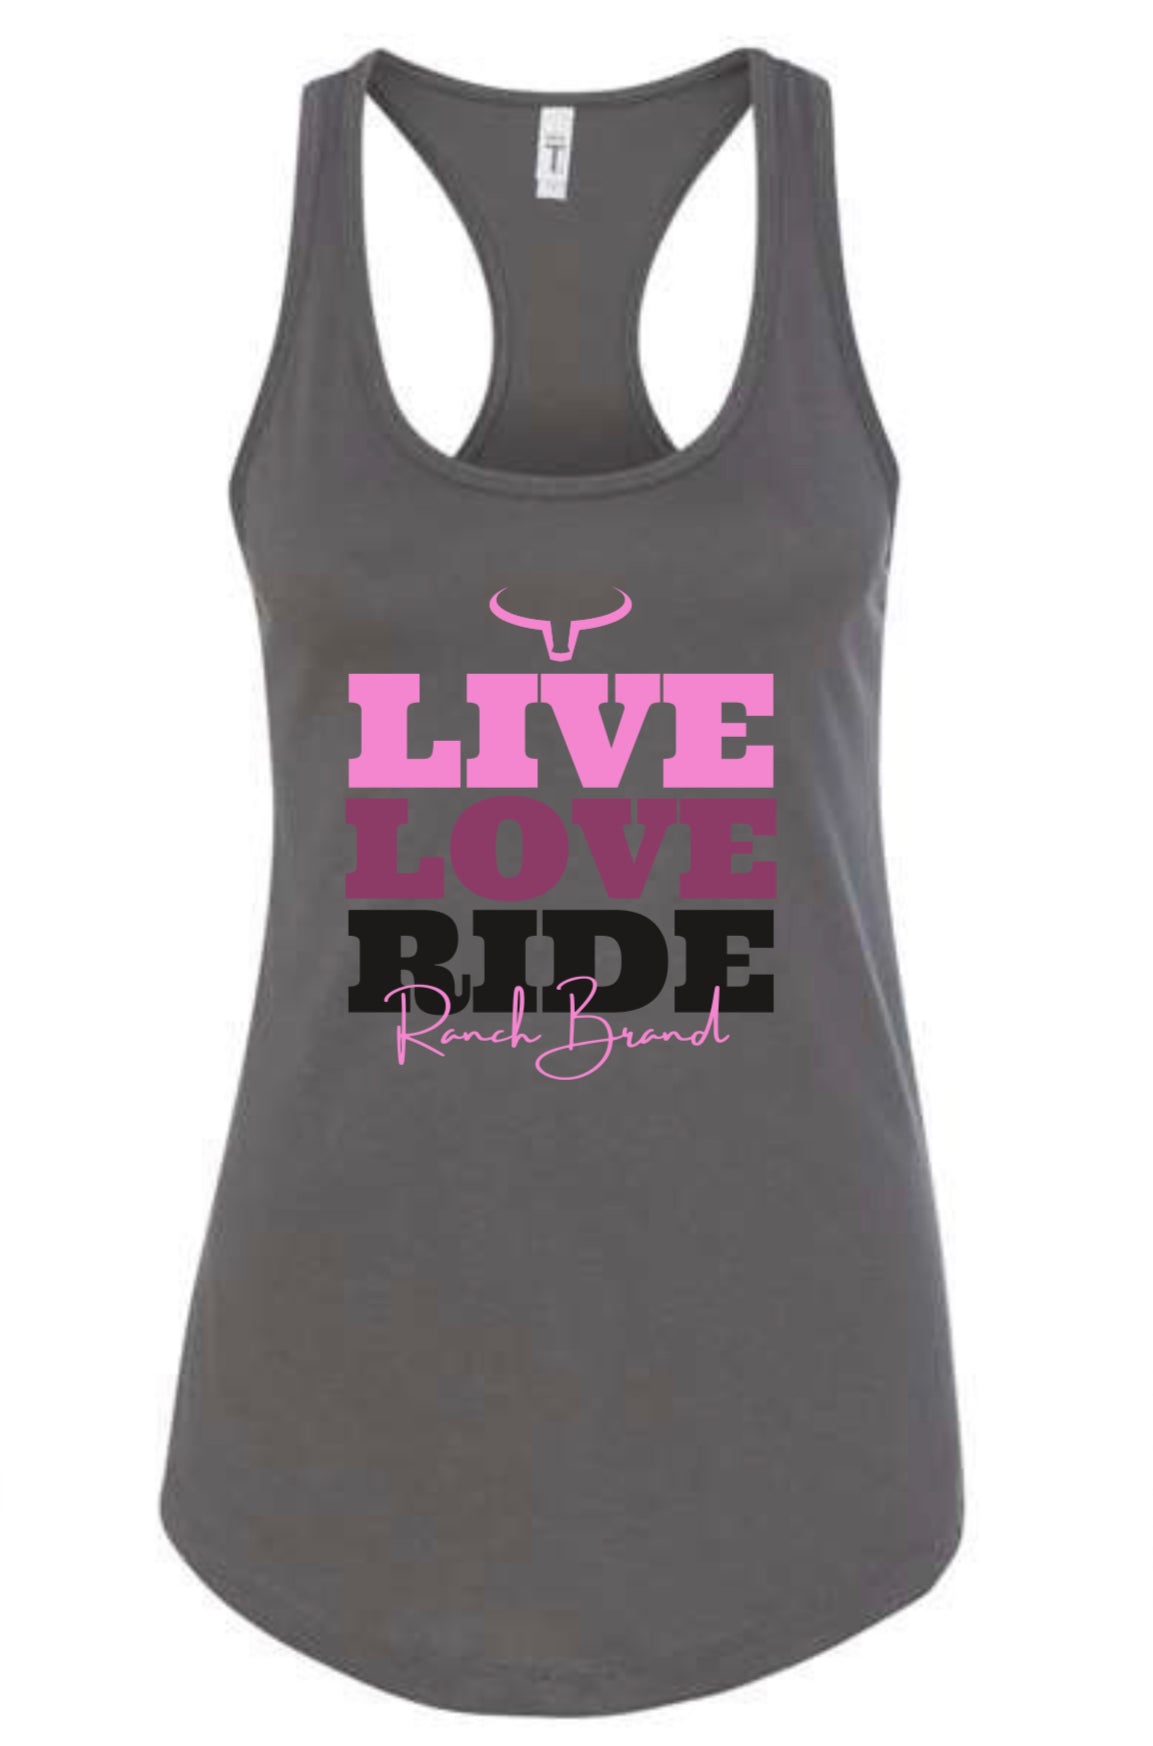 Ranch Brand | Camisole Ride Femme | Gris &amp; Rose